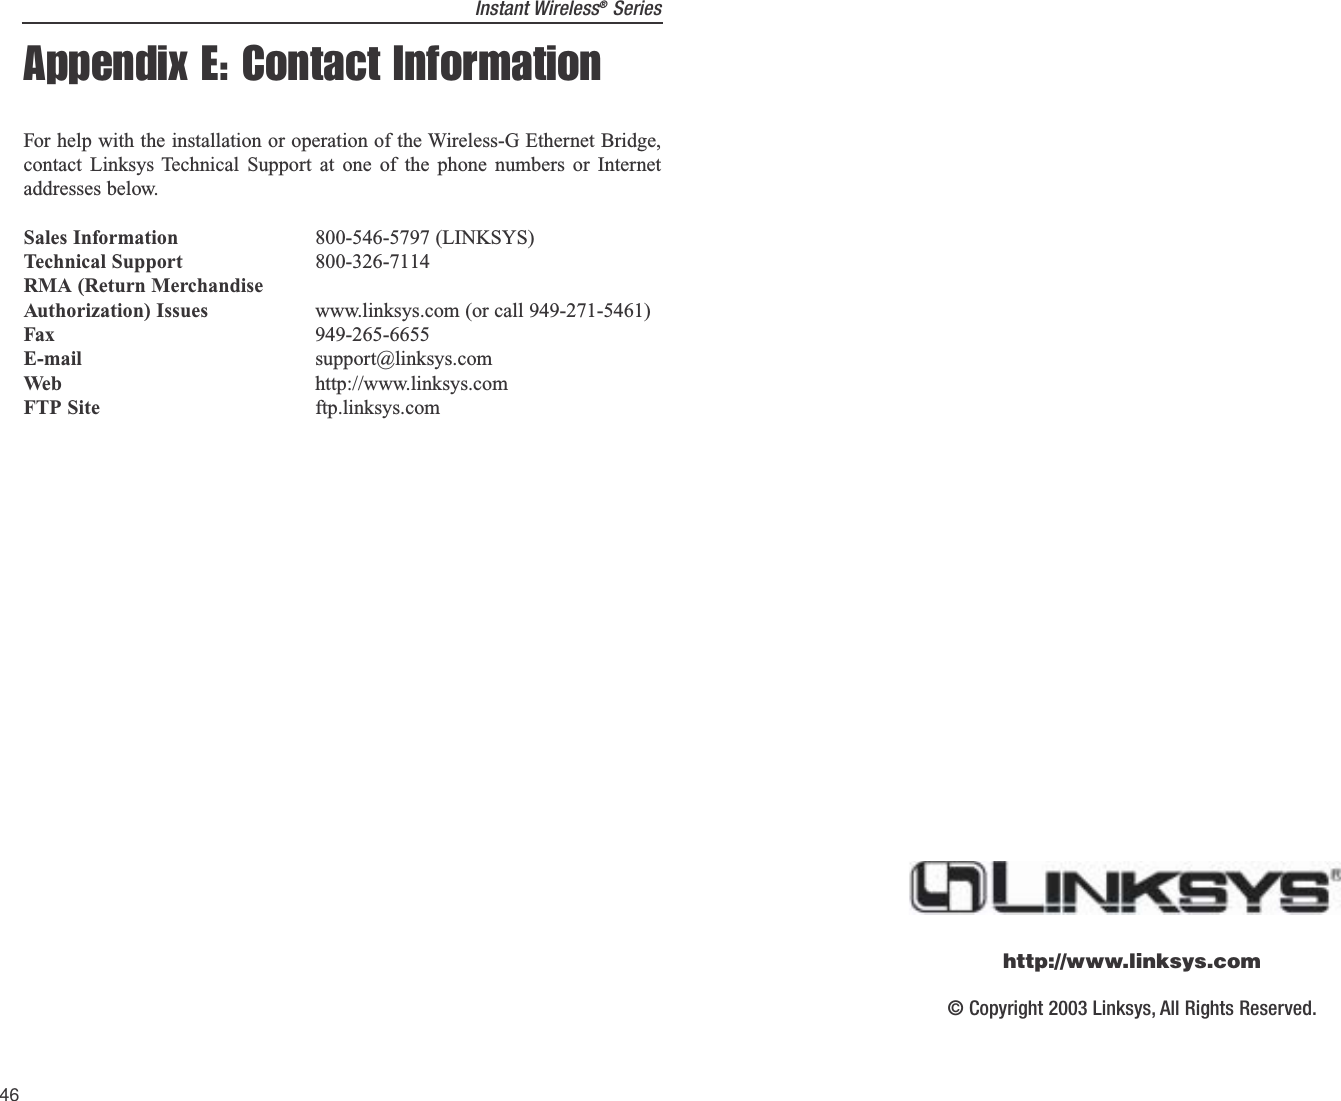 Instant Wireless®SeriesAppendix E: Contact InformationFor help with the installation or operation of the Wireless-G Ethernet Bridge,contact Linksys Technical Support at one of the phone numbers or Internetaddresses below.Sales Information 800-546-5797 (LINKSYS)Technical Support 800-326-7114RMA (Return MerchandiseAuthorization) Issues www.linksys.com (or call 949-271-5461)Fax 949-265-6655E-mail support@linksys.comWeb http://www.linksys.comFTP Site ftp.linksys.com46© Copyright 2003 Linksys, All Rights Reserved.http://www.linksys.com